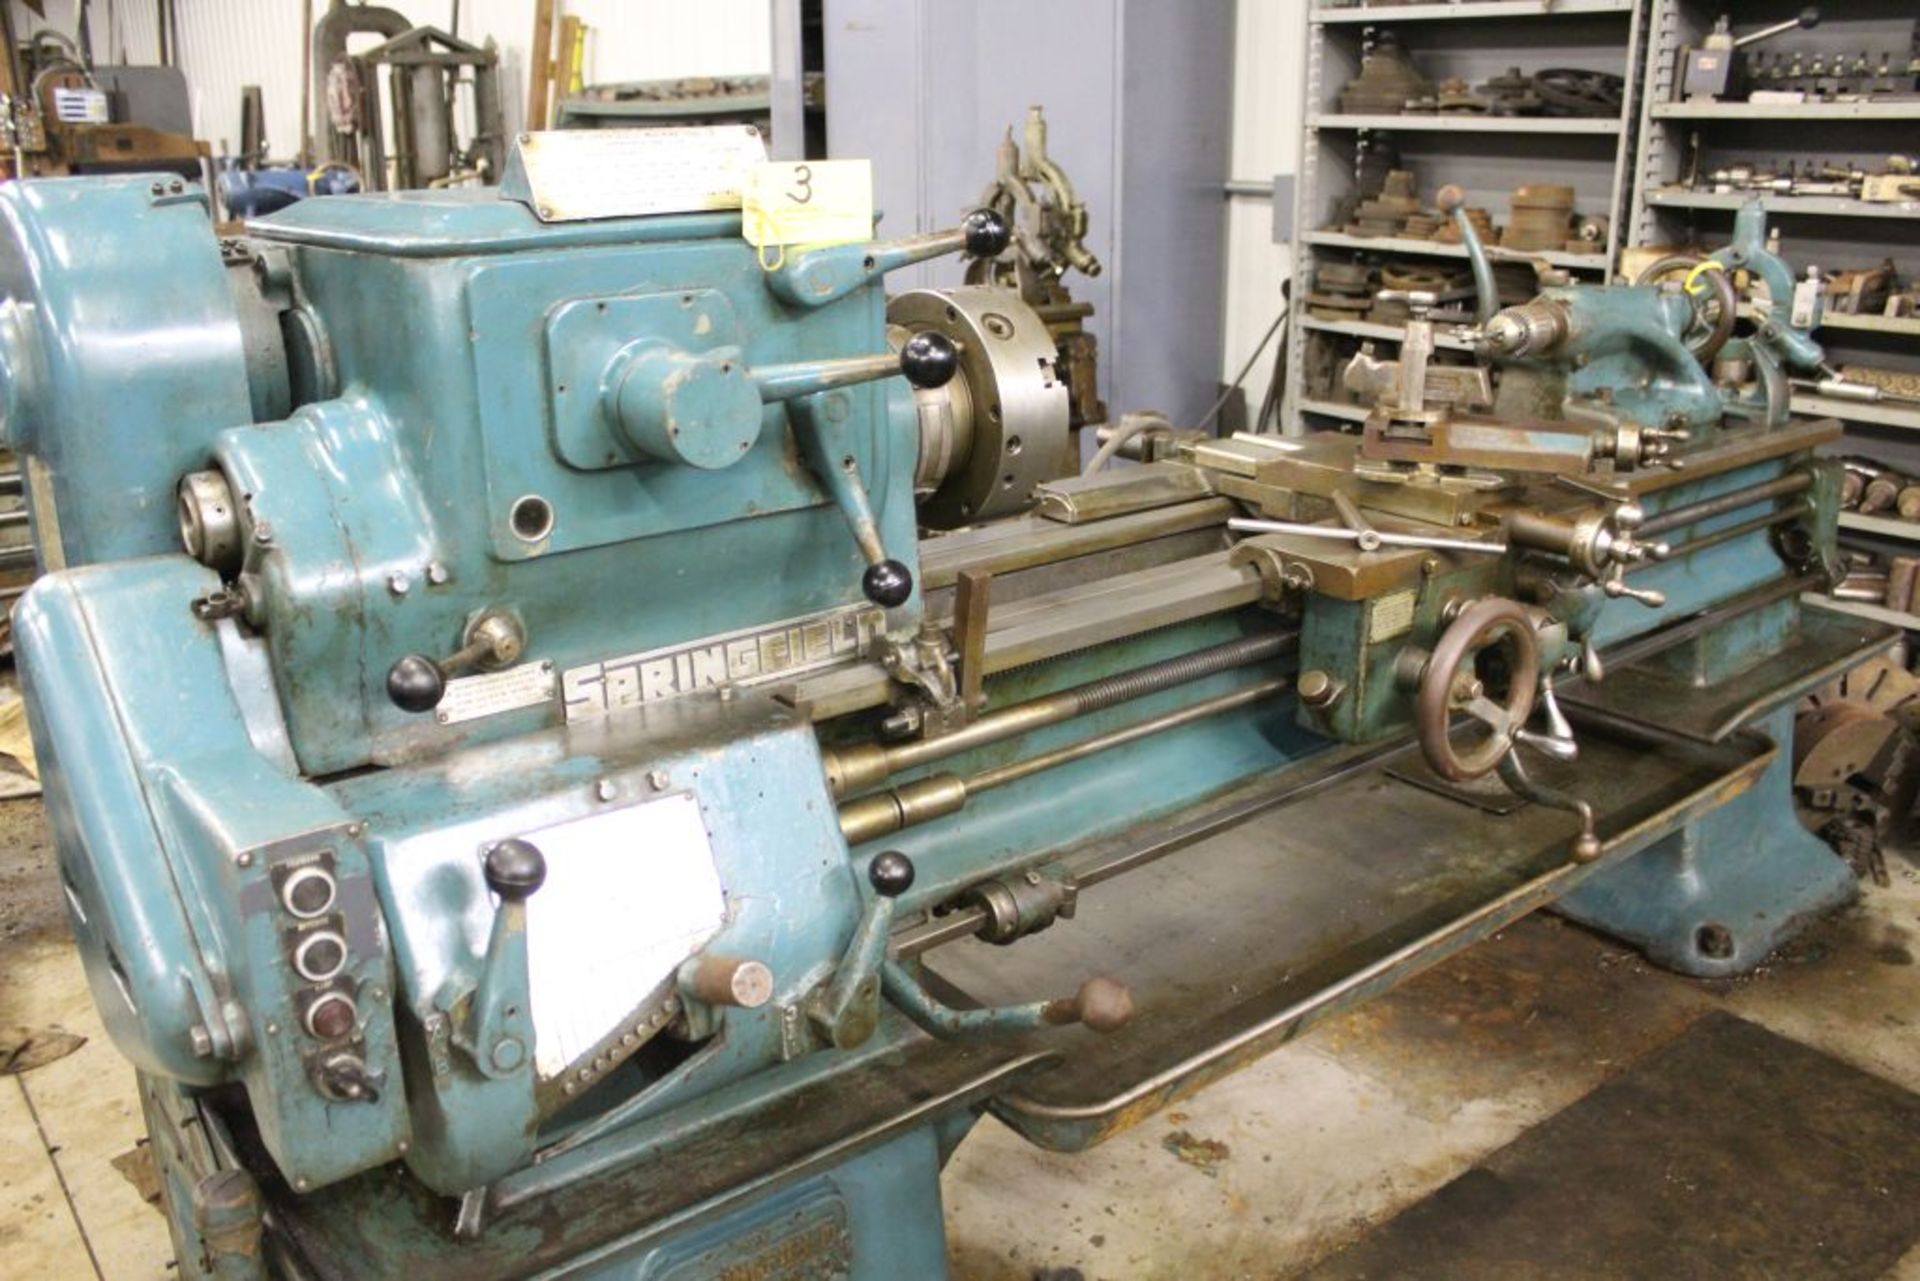 Springfield lathe, sn 52071, 14", 1 3/4" hole, 16" swing, 48" center to center, taper attachment,